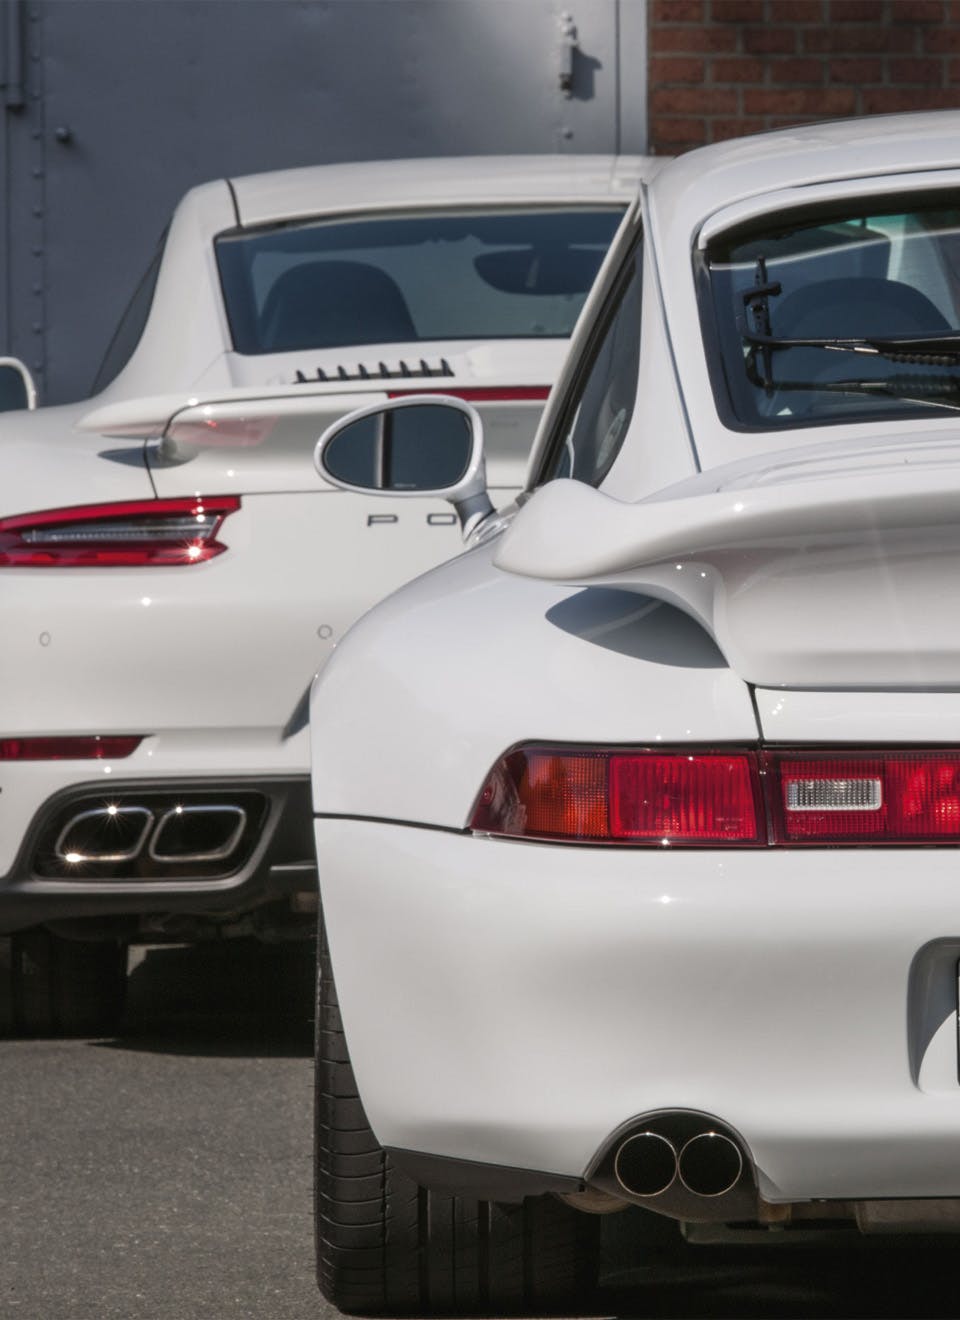 Spoiler vs Wing: Which one makes your car go faster? - ModifiedX